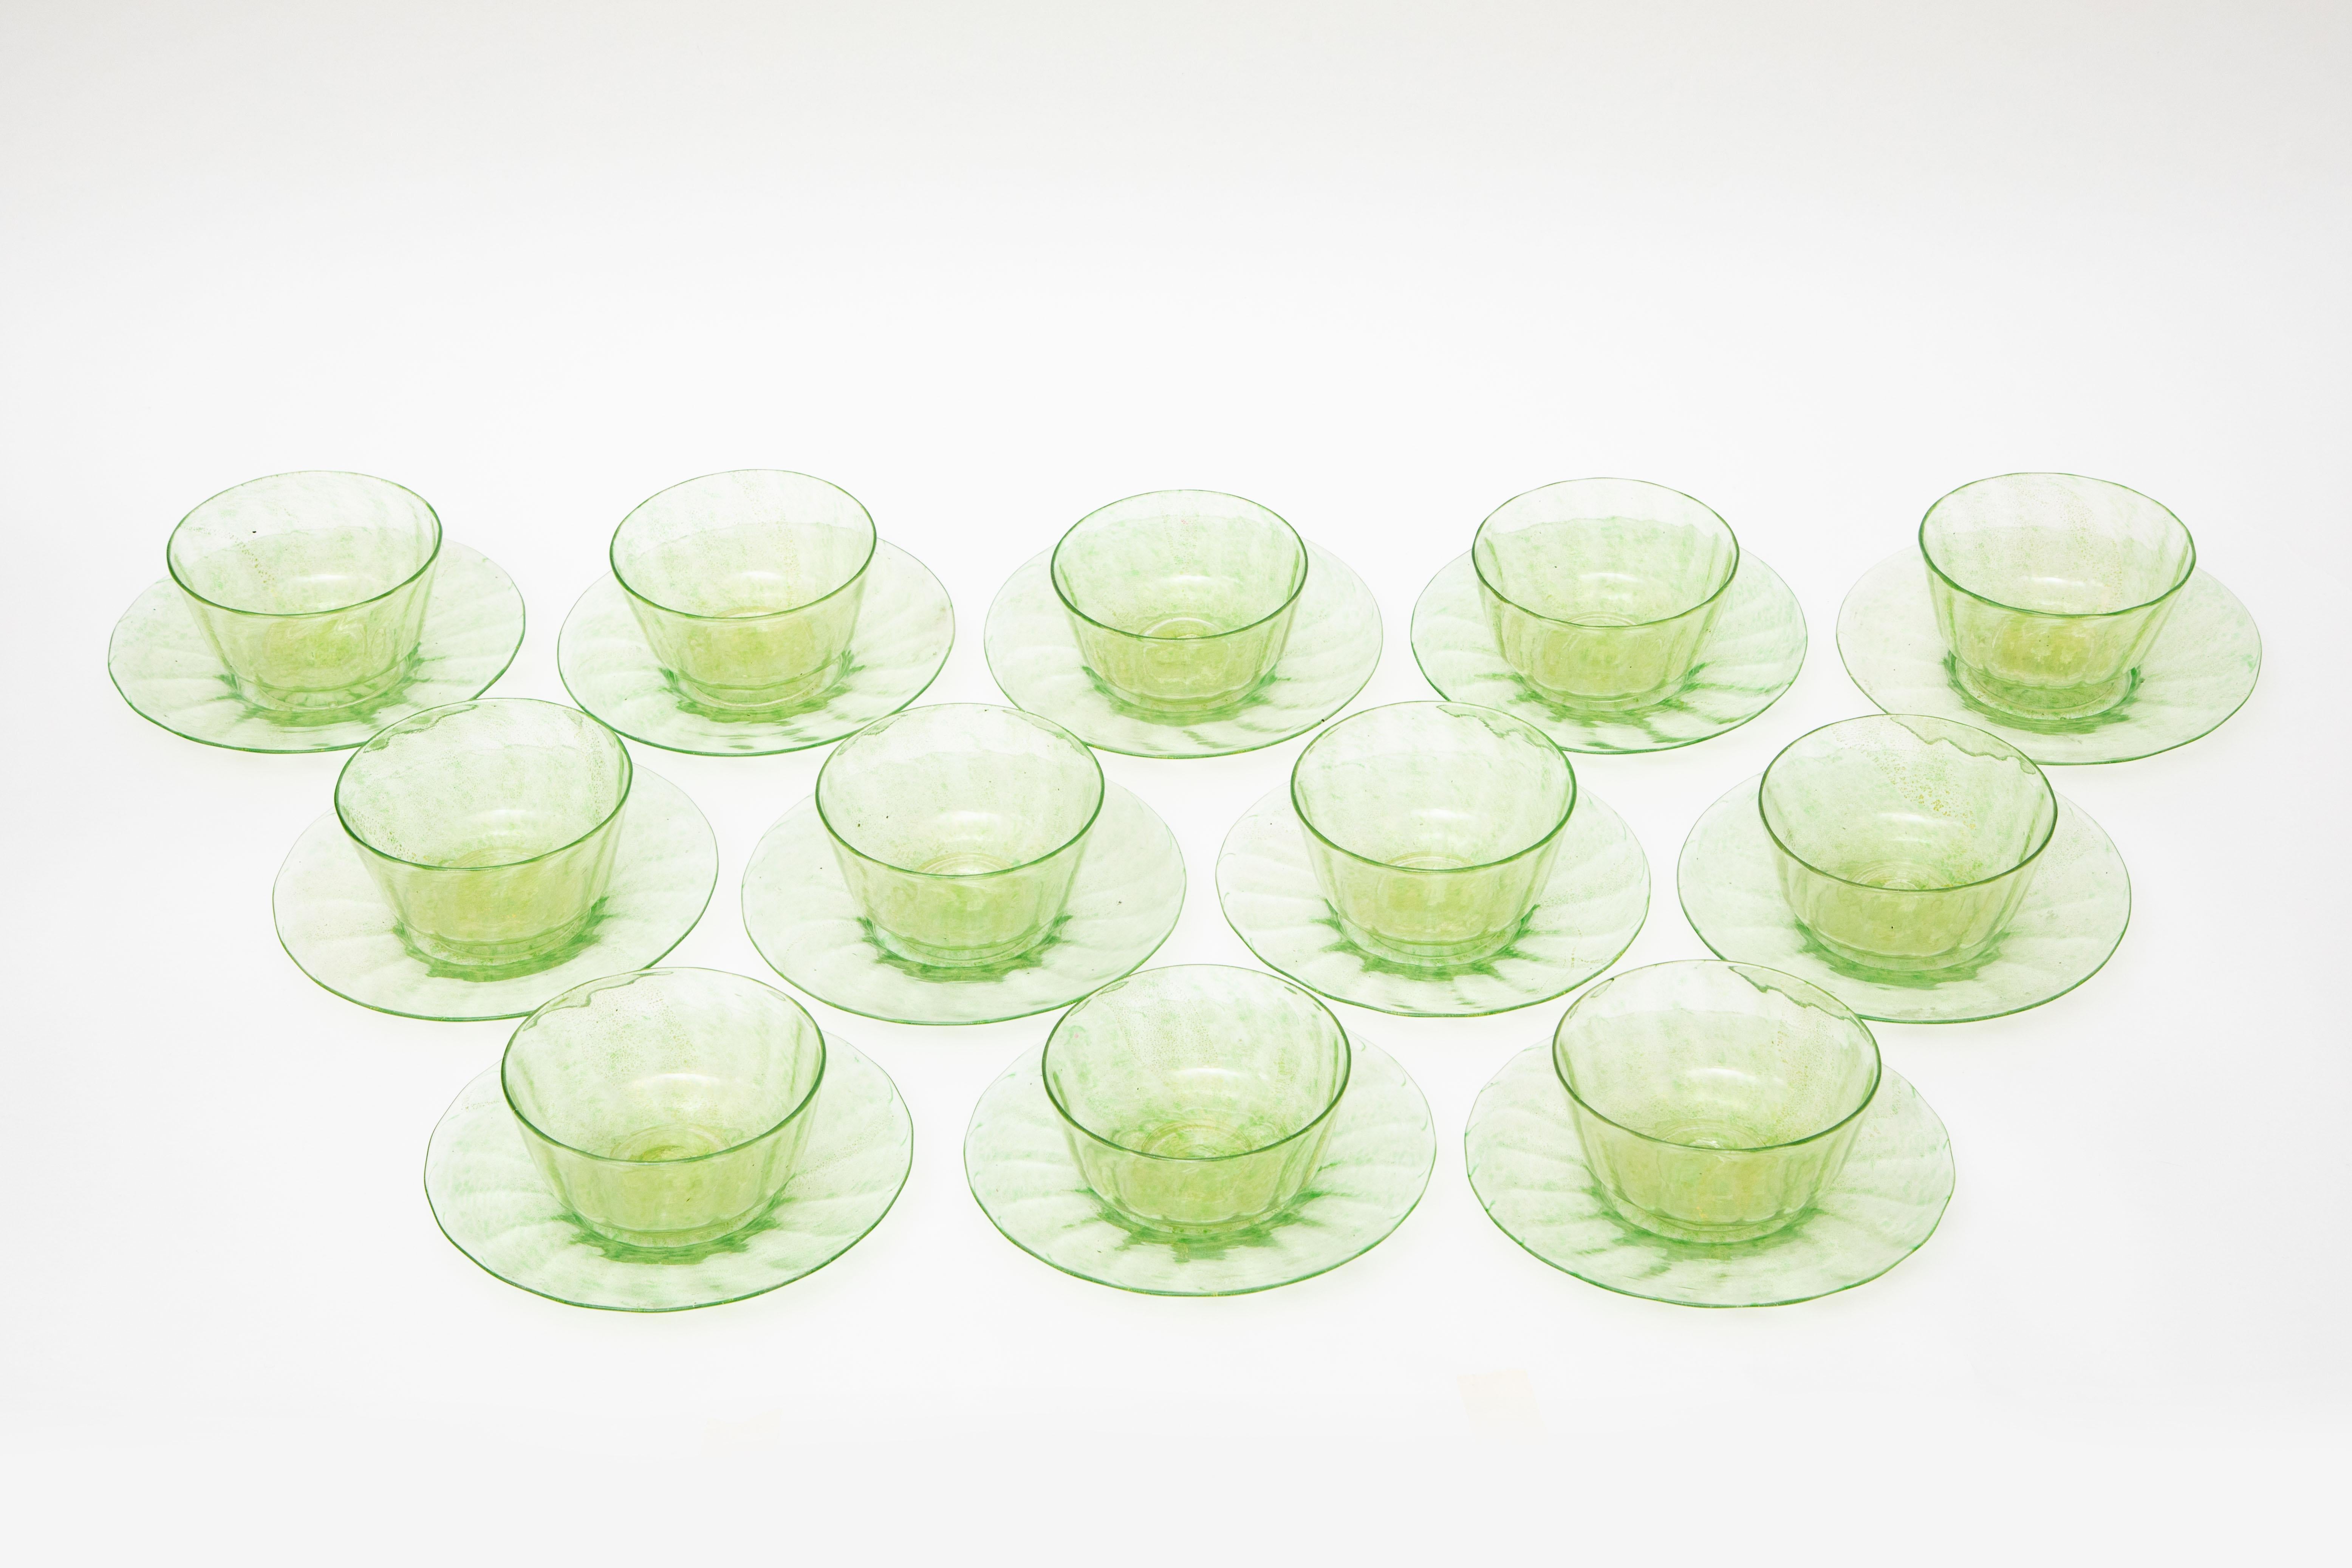 Early 20th Century 24 Pieces Antique Venetian Glass with 12 Bowls & 12 Plates, Salviati, circa 1920